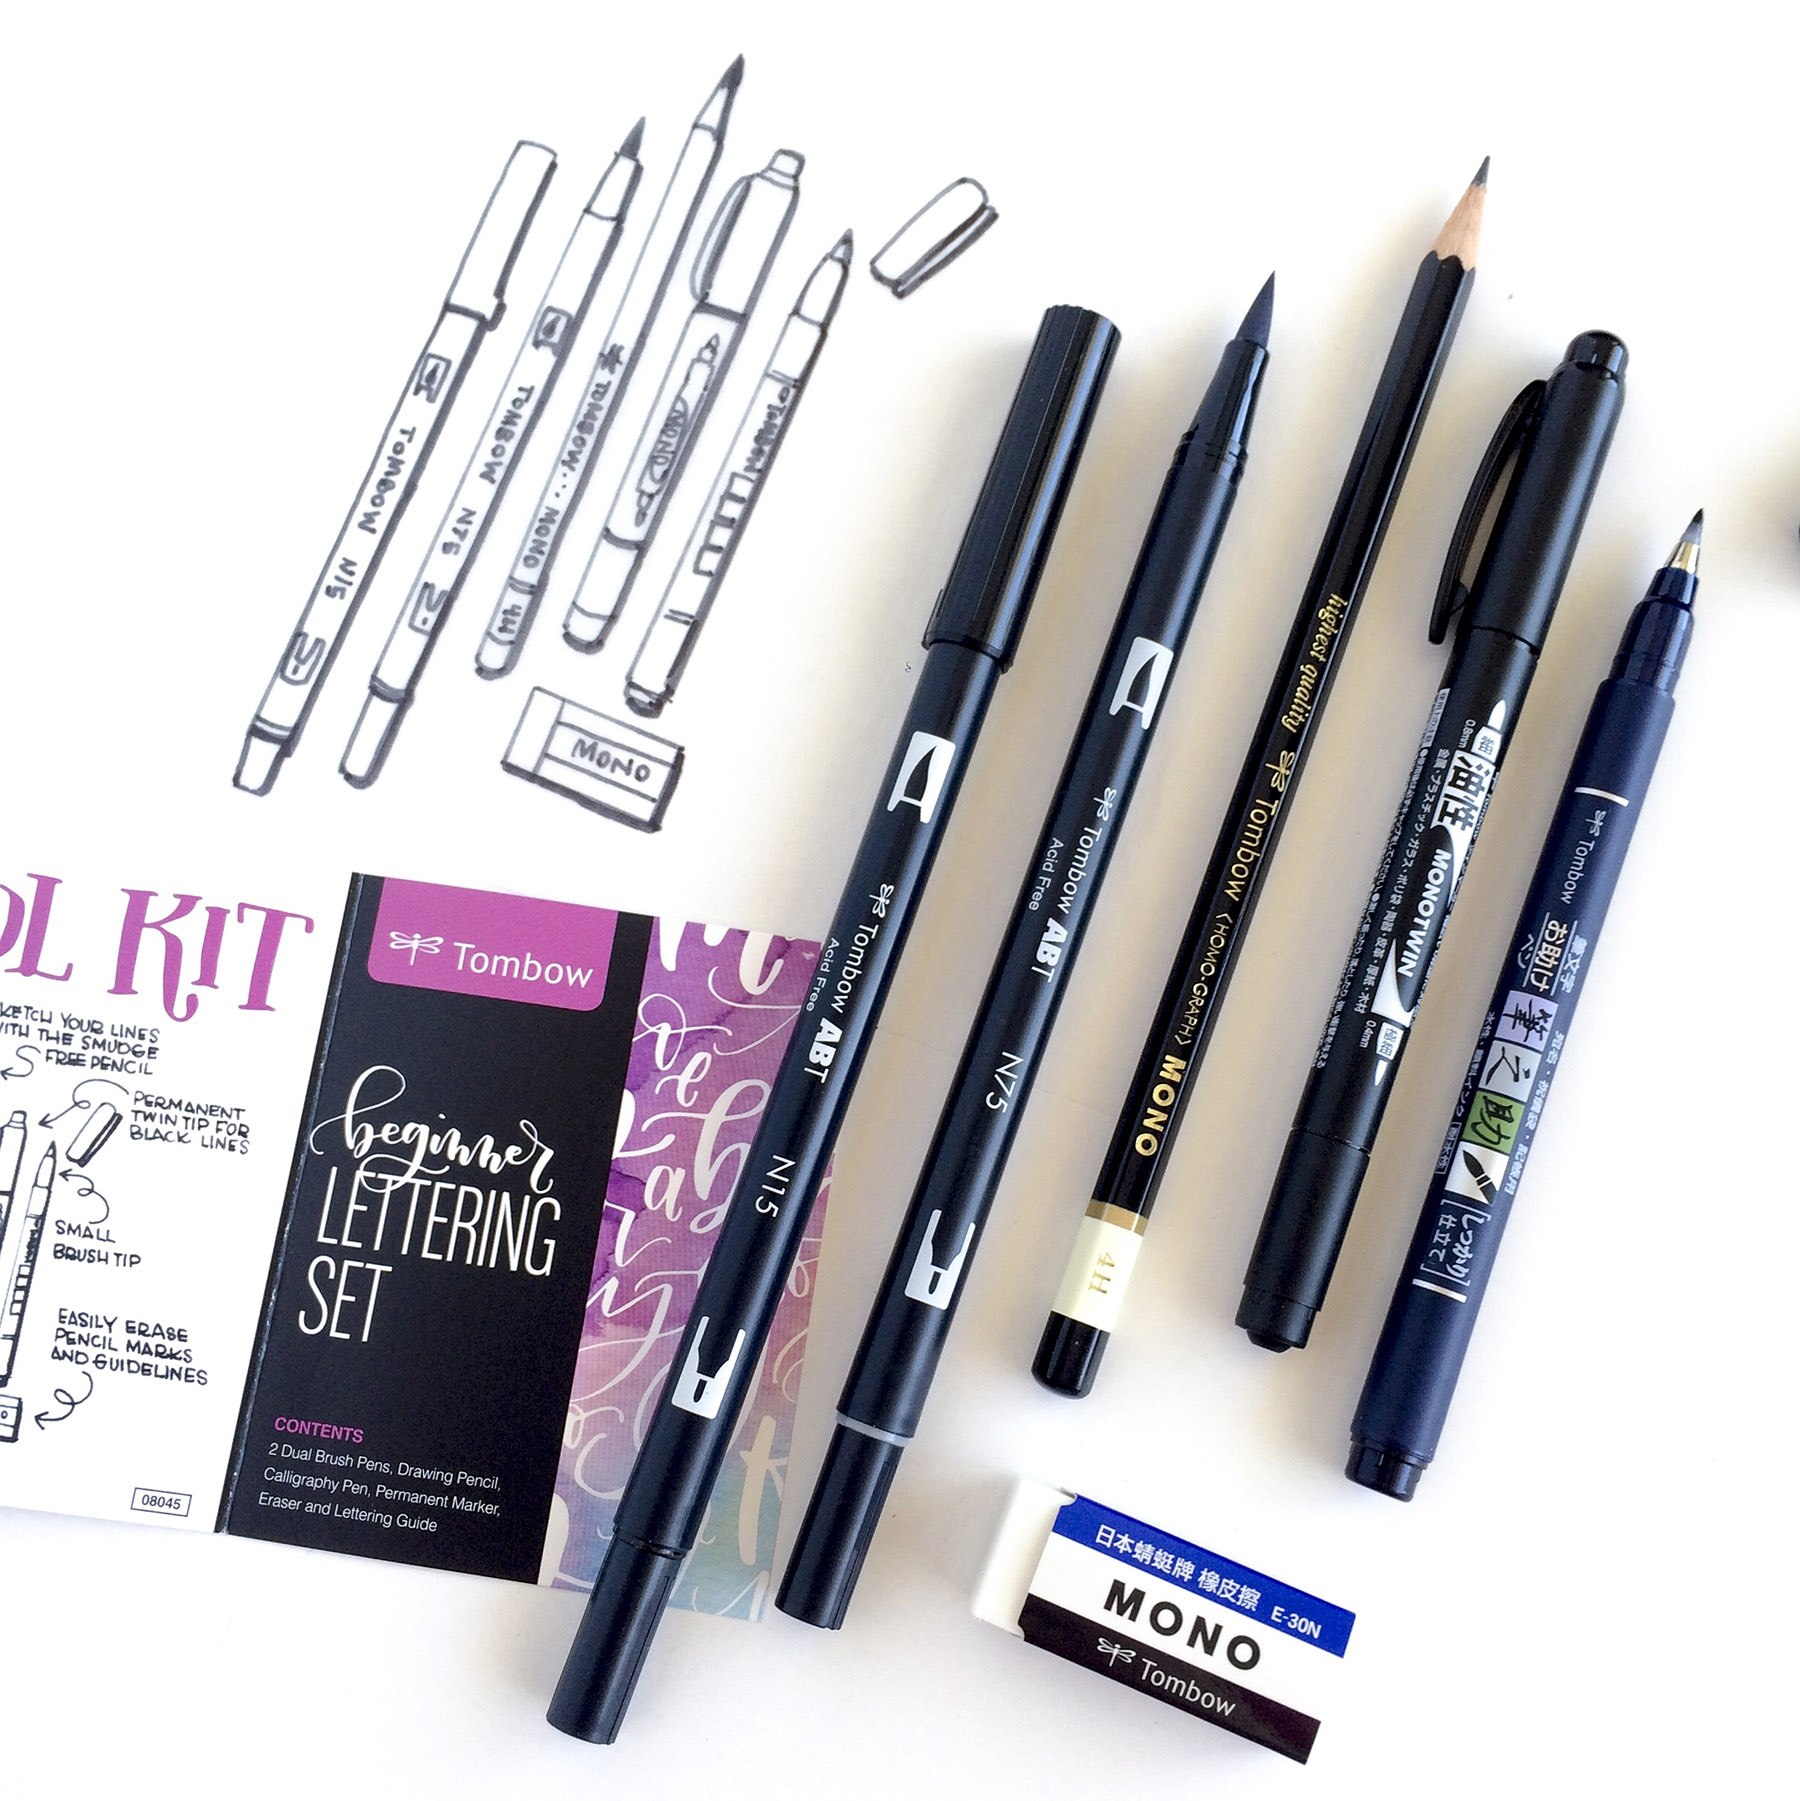 5 Steps to Working with Clients | by Amanda Arneill for Tombow | Introducing Tombow's new Lettering Sets!